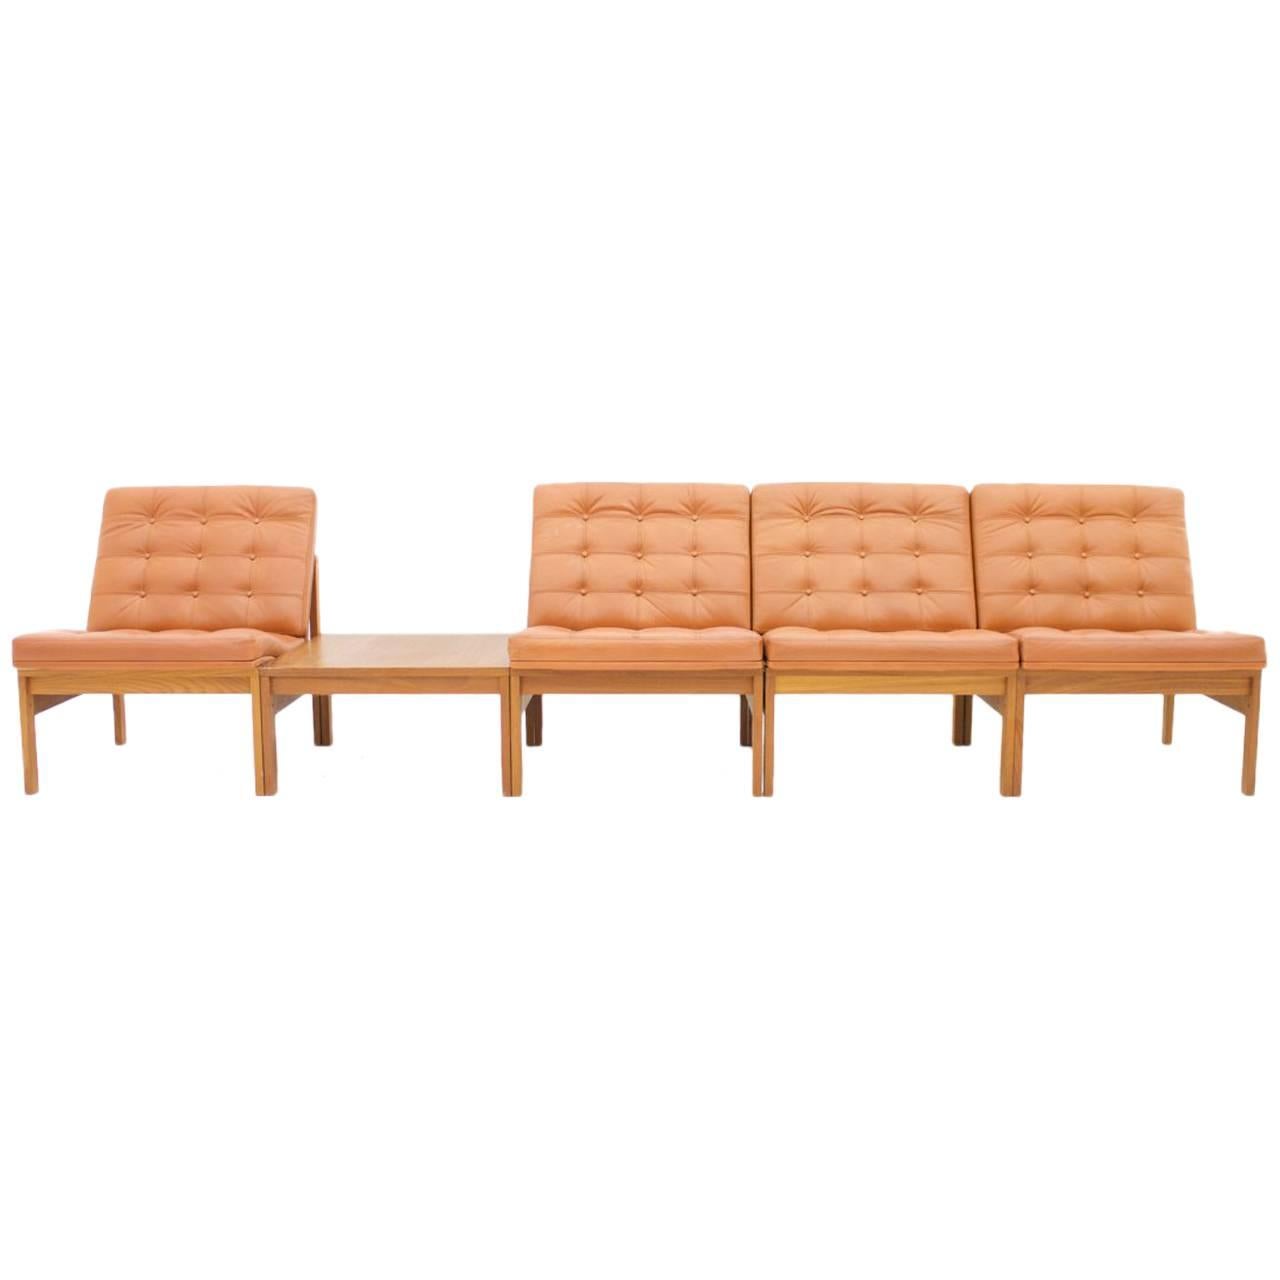 Torben Lind and Ole Gjerlov Modular Seating Sofa Chairs for France & Son Denmark For Sale